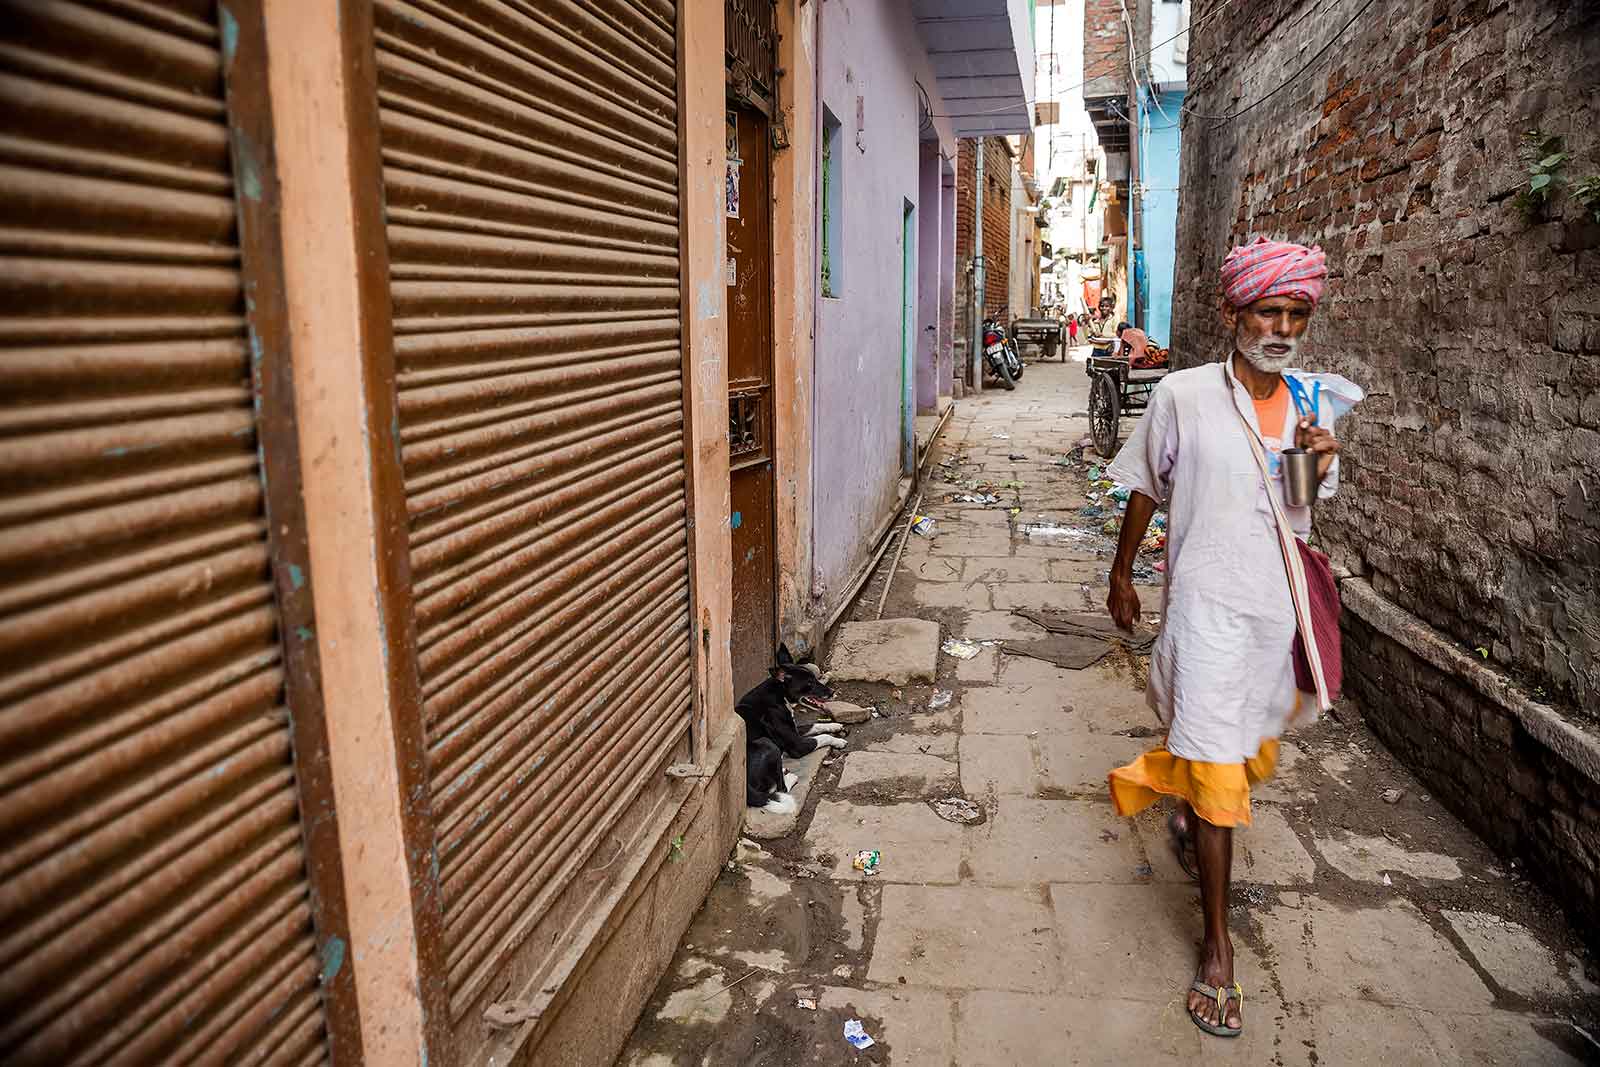 The old city of Varanasi extends about two kilometres back from the river and is a maze of alleyways and streets.